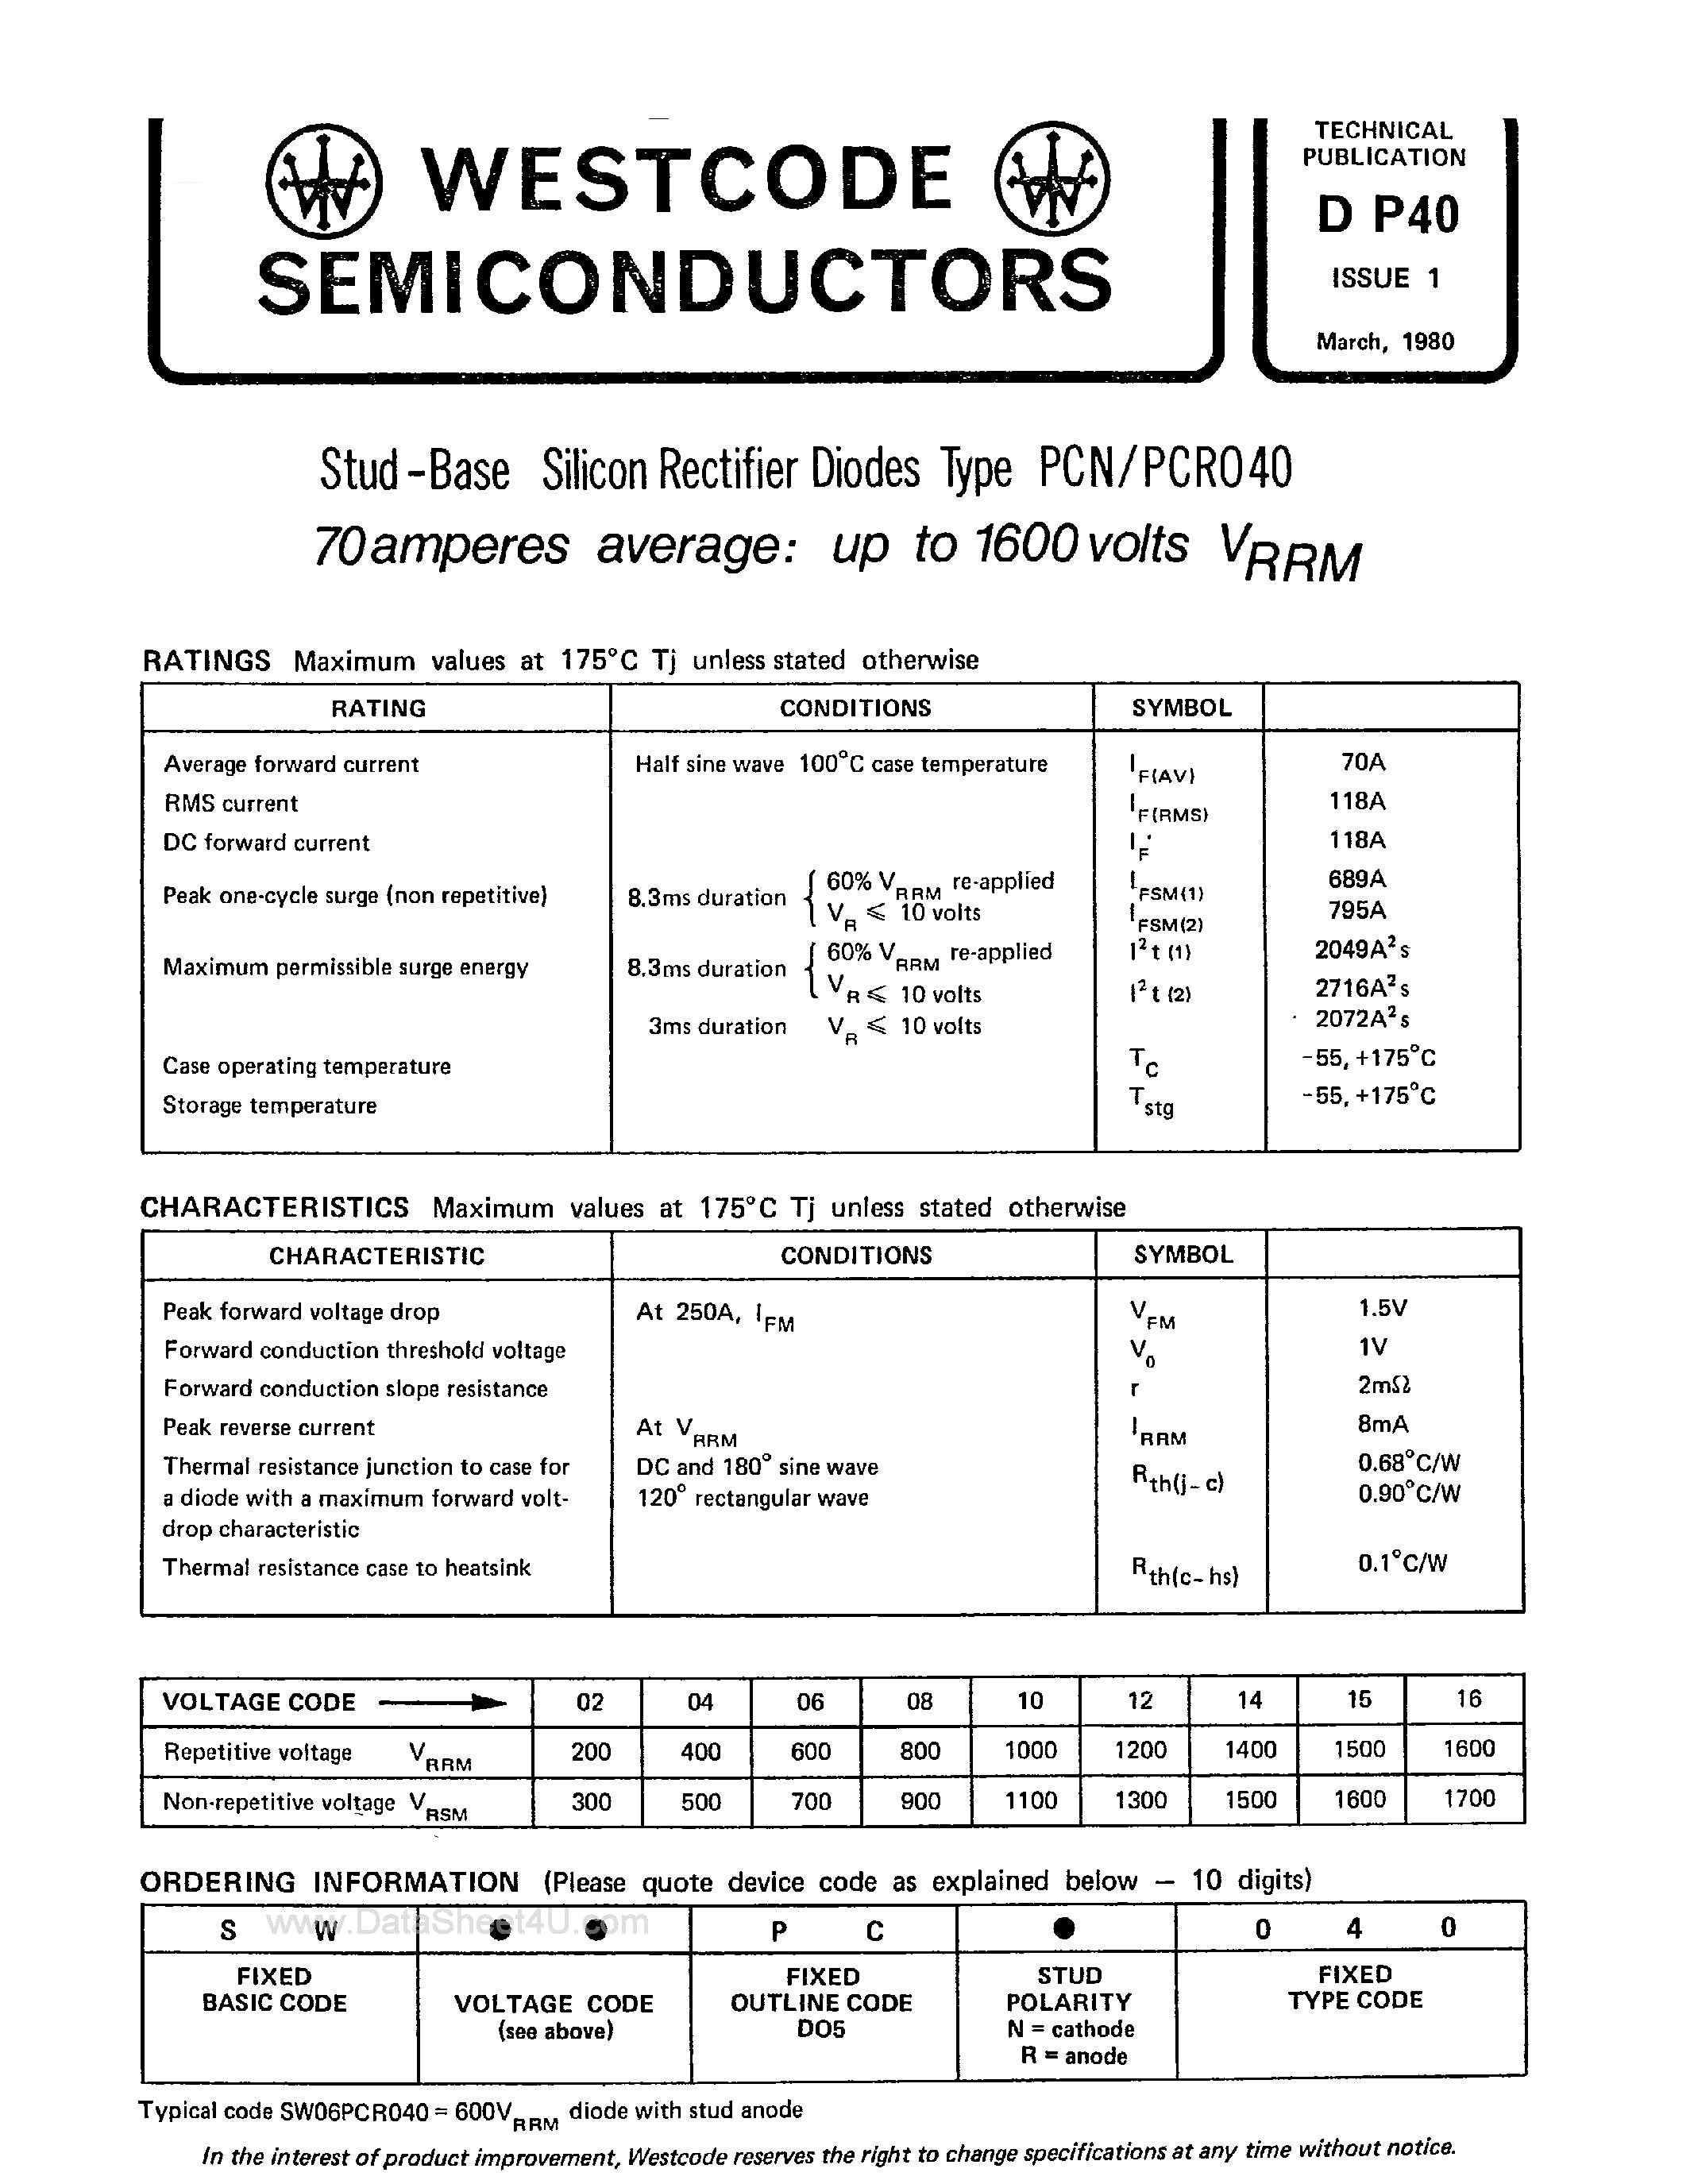 Datasheet SW15PCN040 - Stud Base Silicon Rectifier Diodes page 1